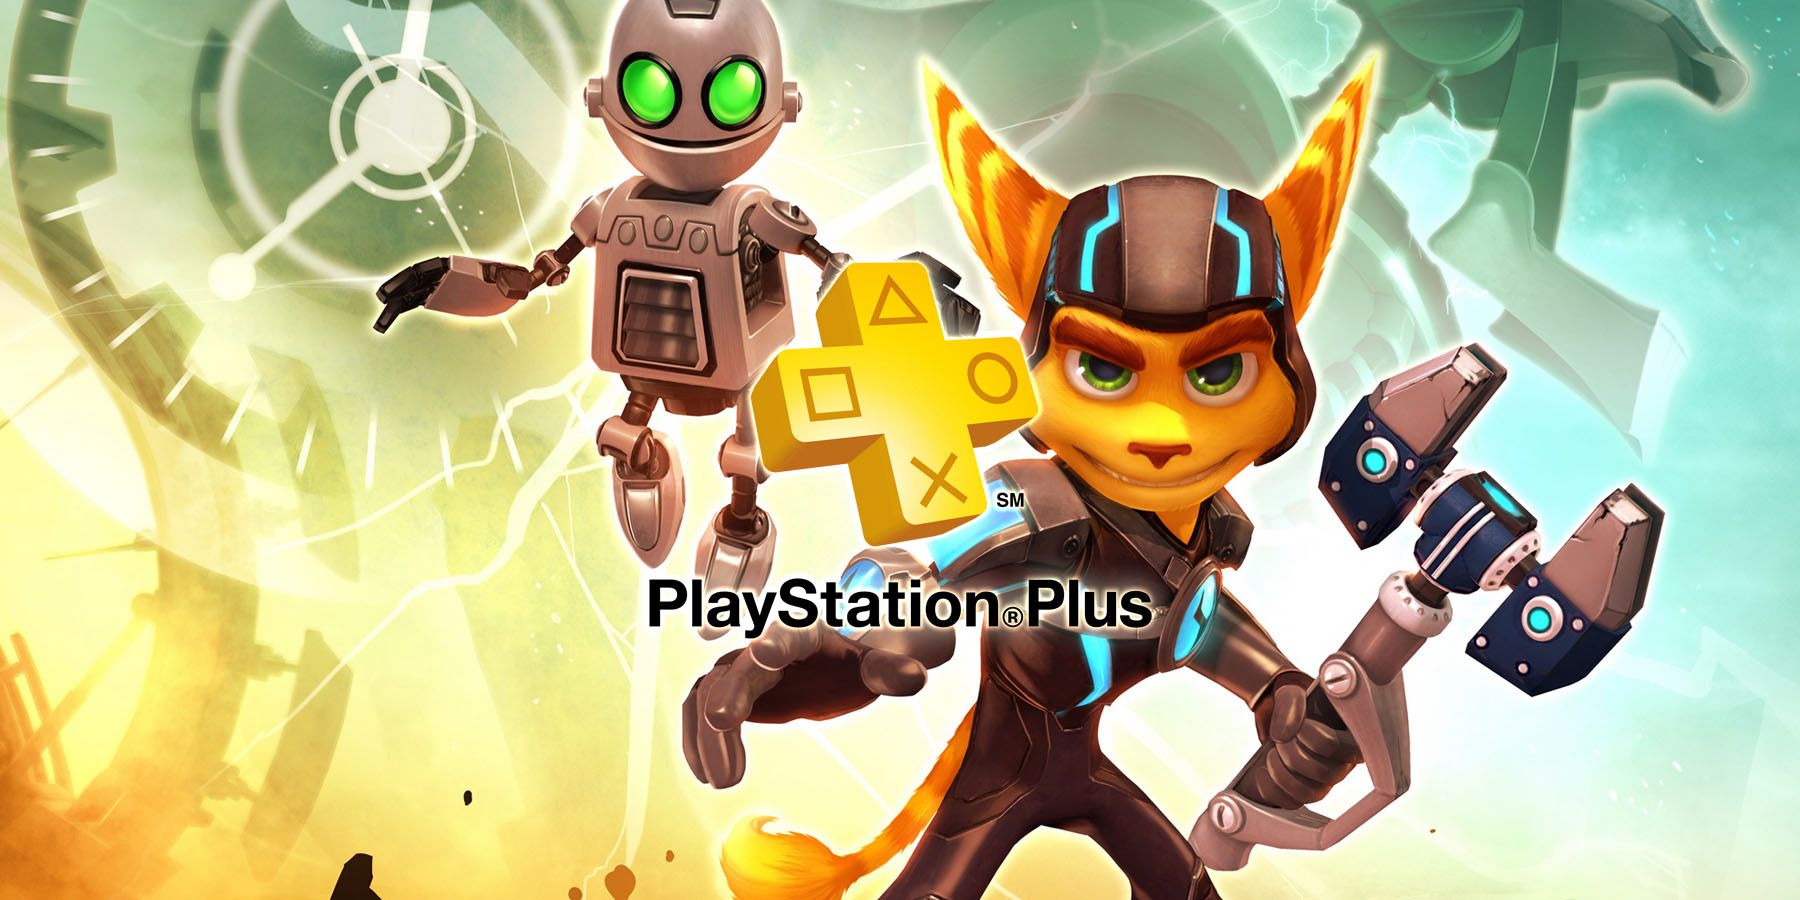 ratchet-and-clank-ps3-playstation-plus-4